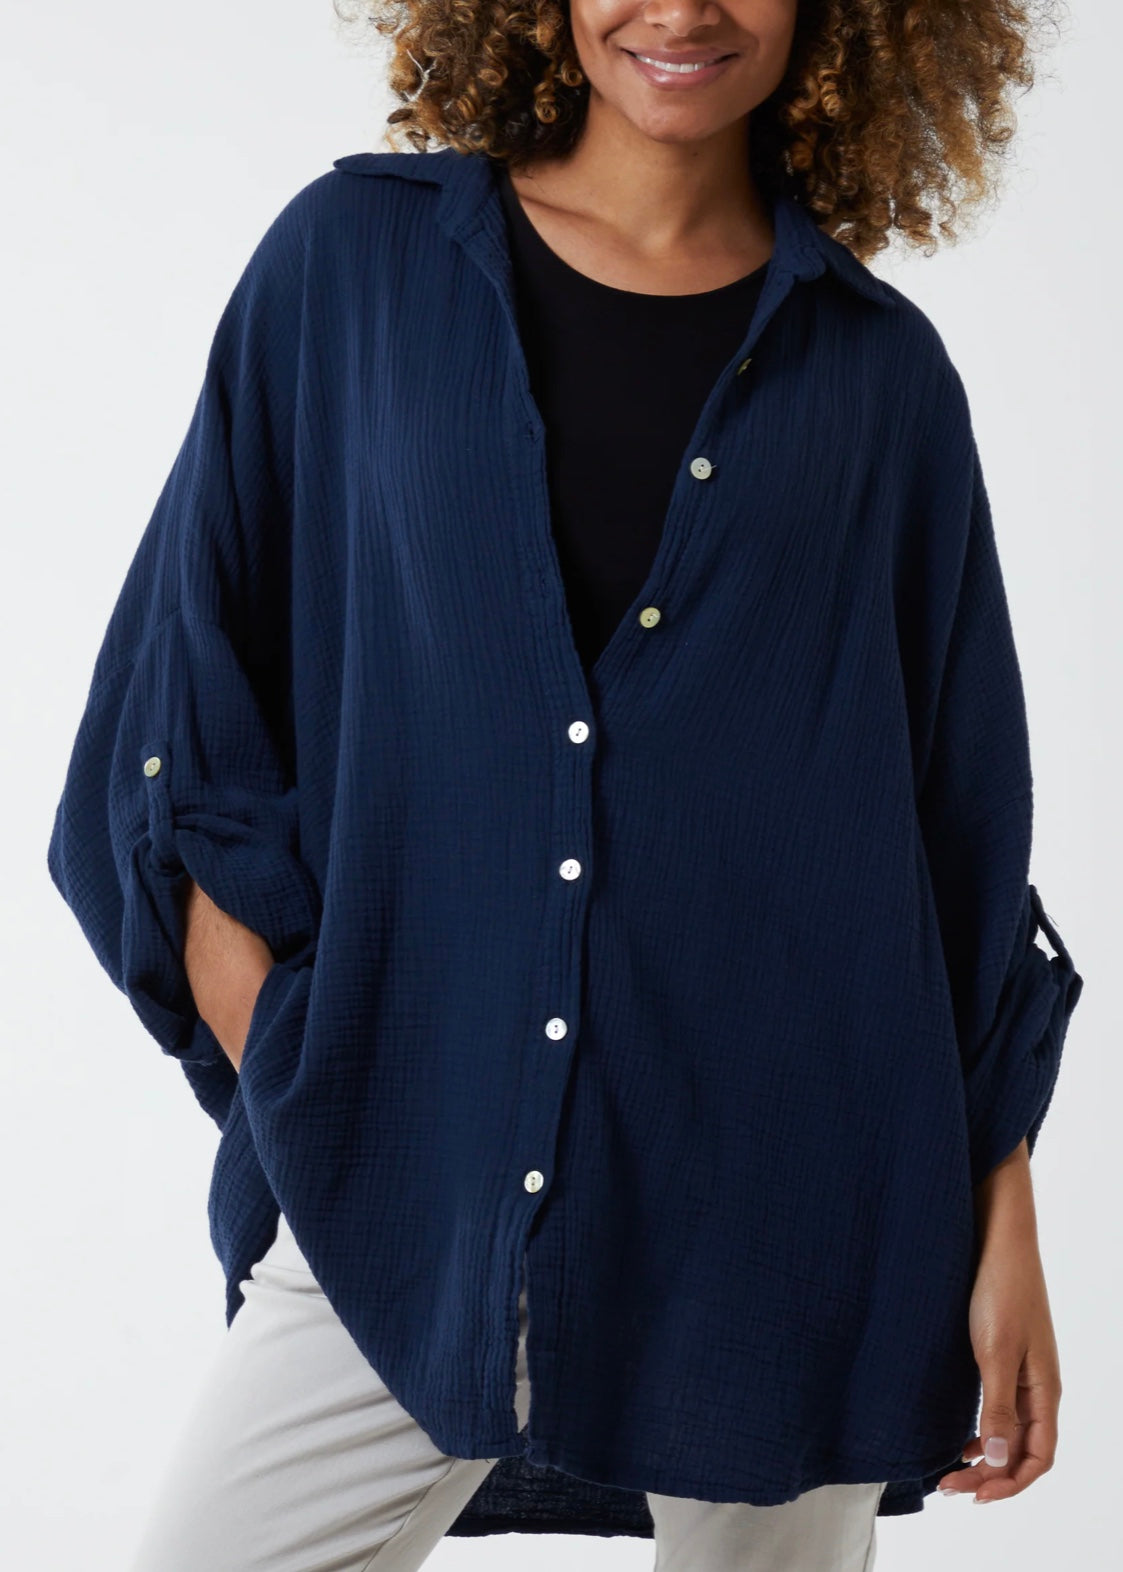 Sands - Cheesecloth Shirt / Navy